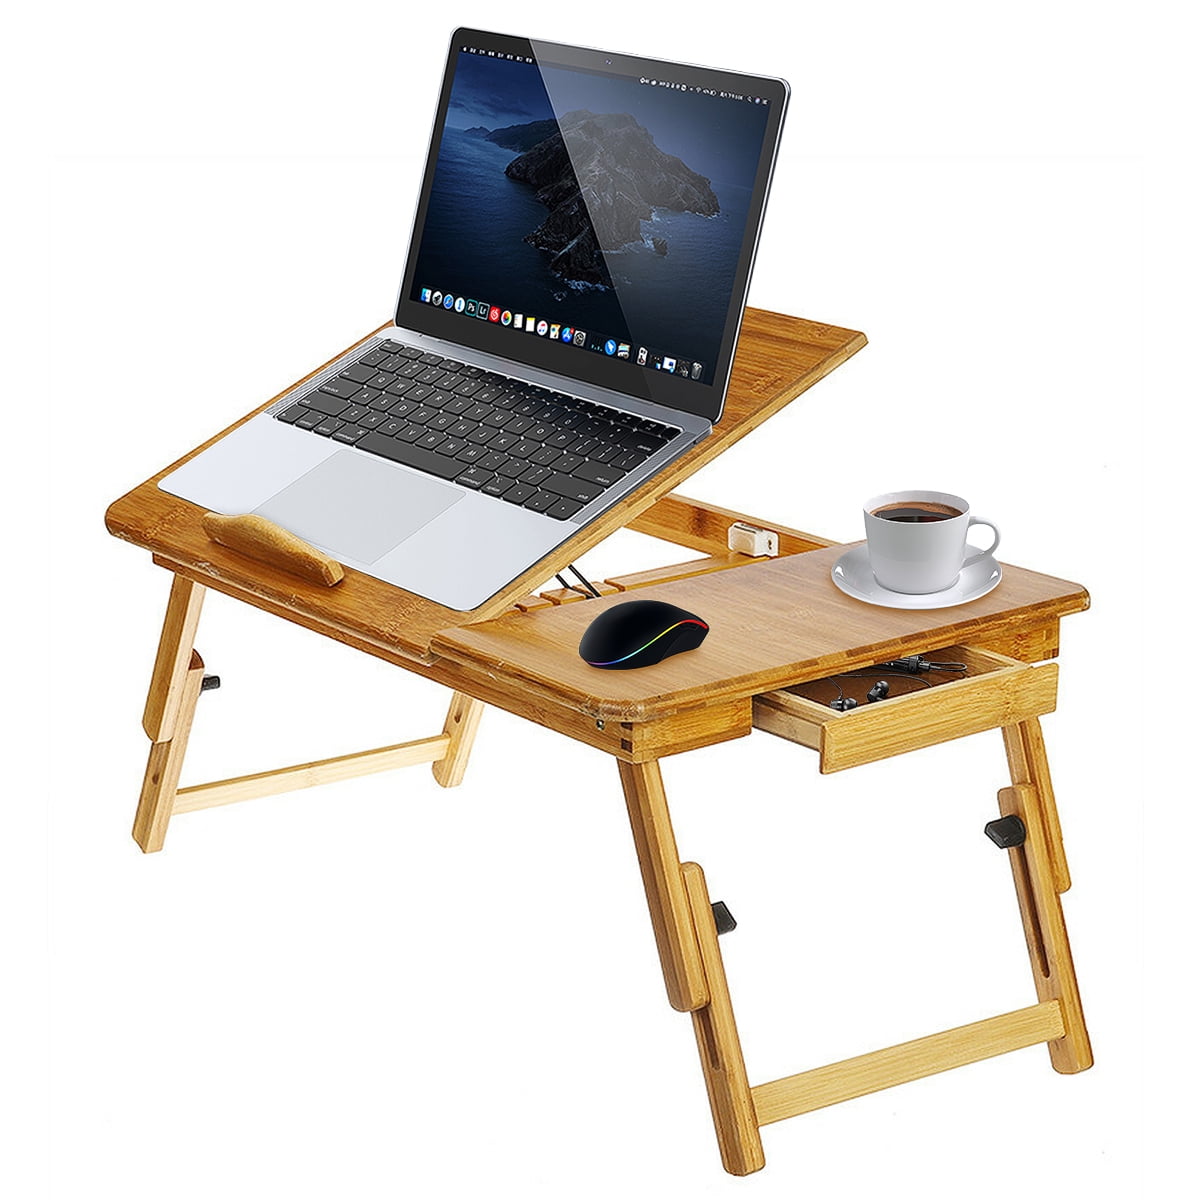 Portable Laptop Desk Foldable Lap Bed Tray Adjustable Table Stand Bamboo Desk 